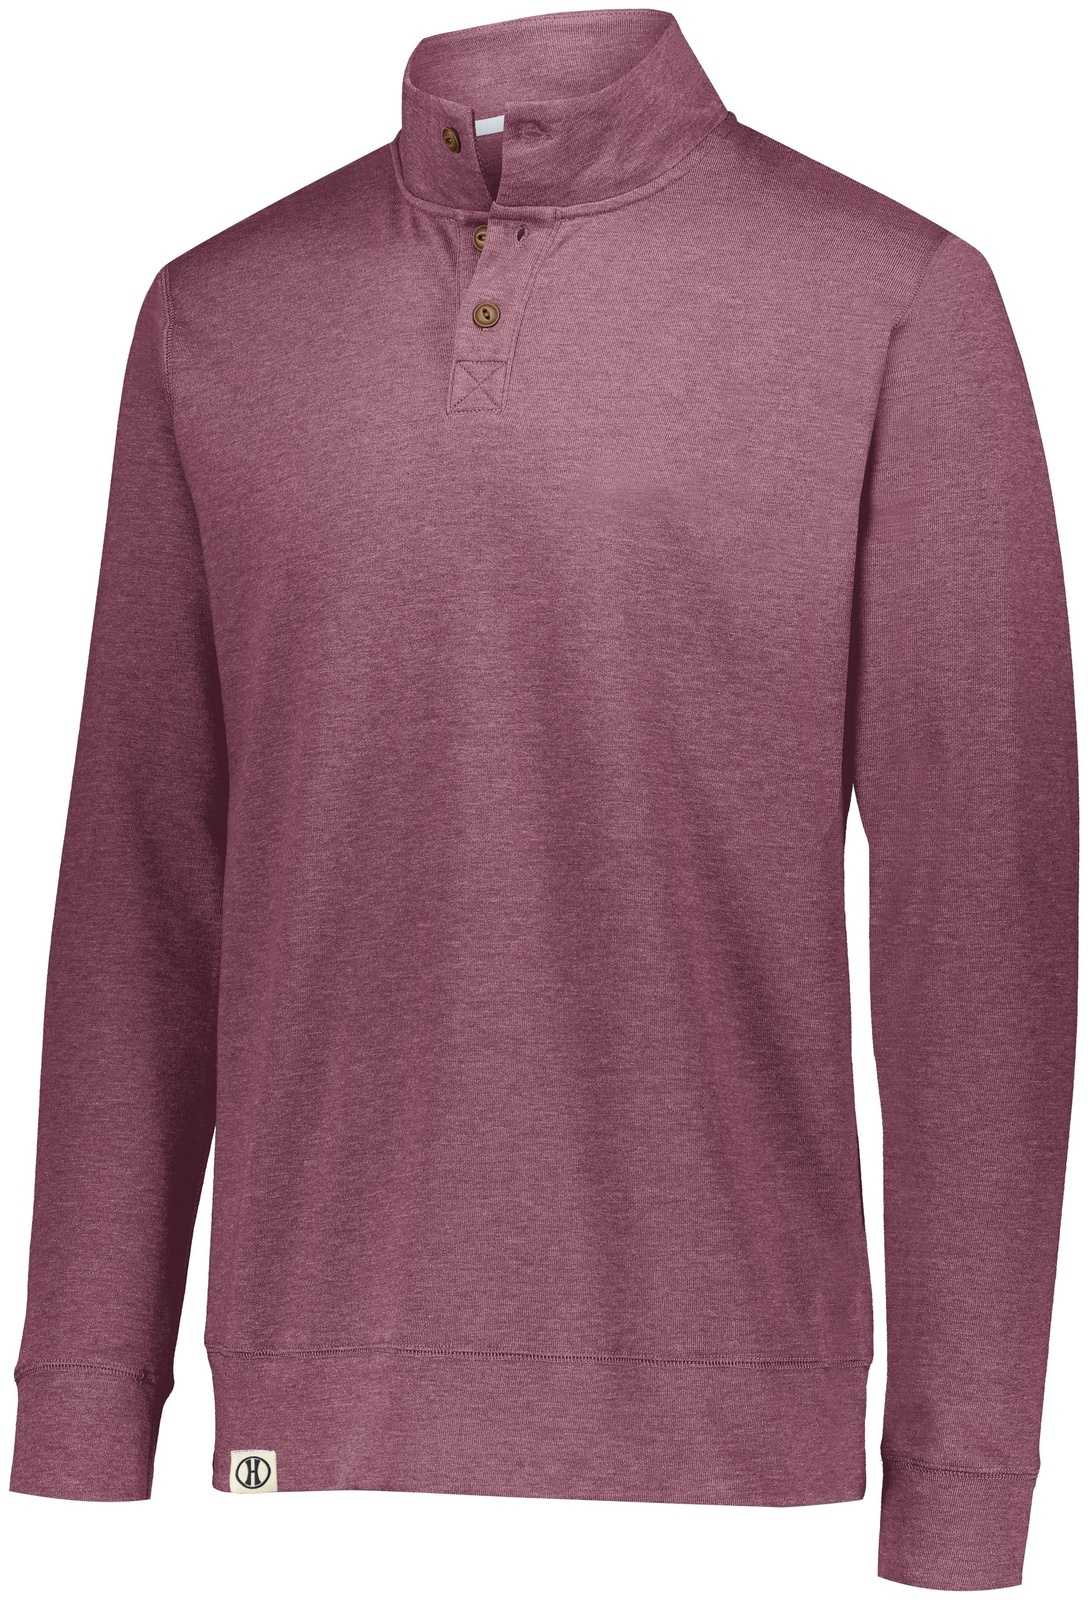 Holloway 229575 Sophomore Pullover - Maroon Heather - HIT a Double